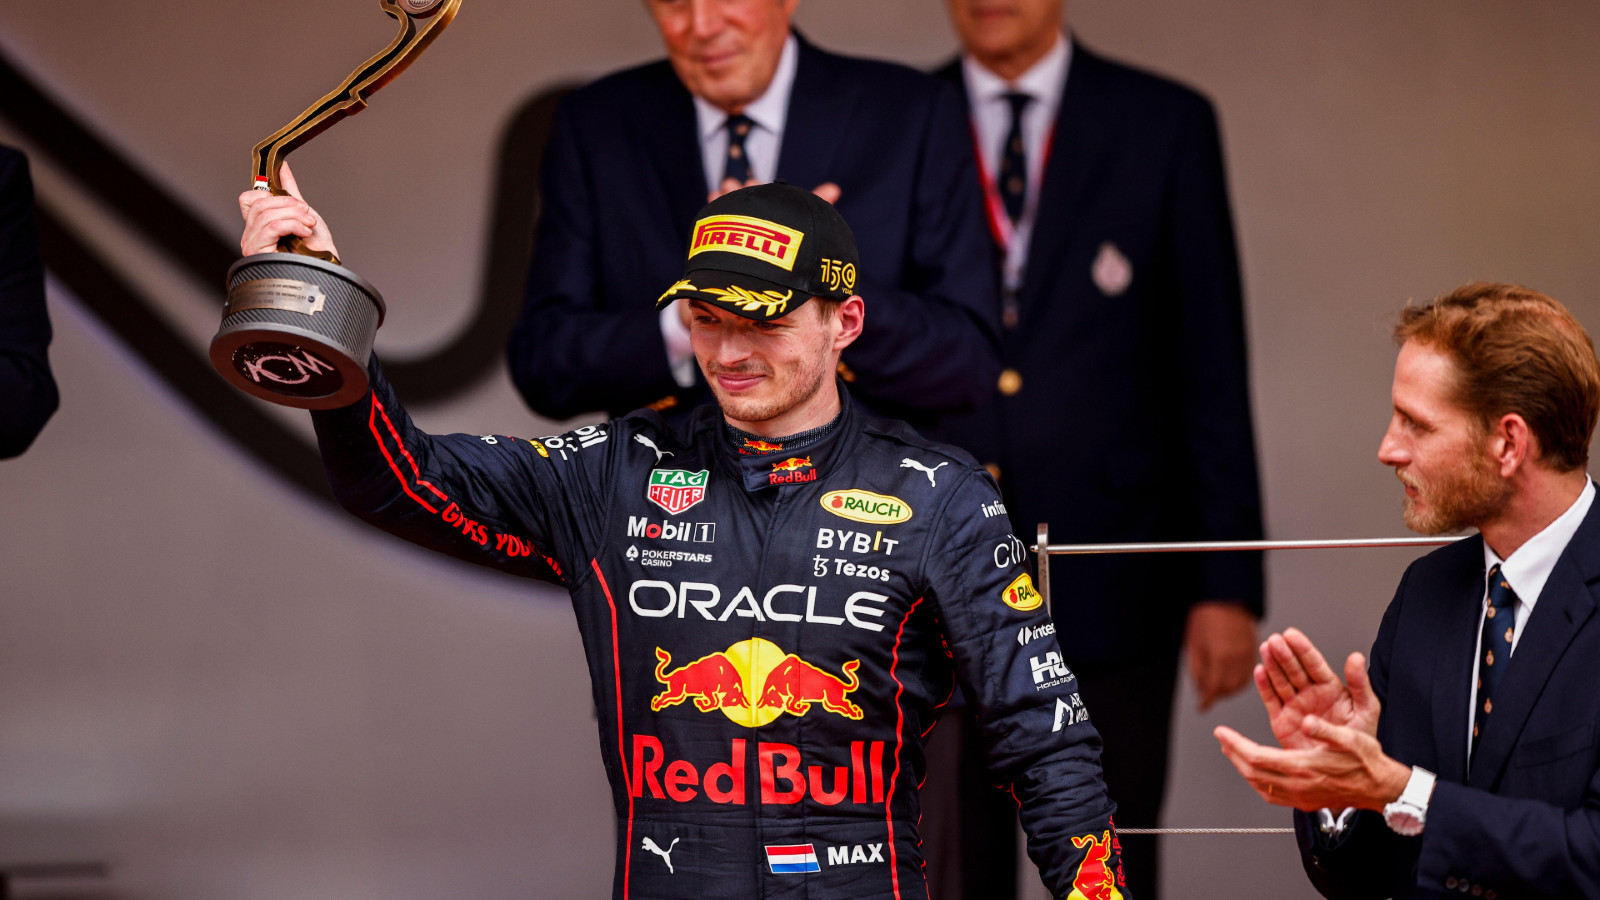 Max Verstappen 'won't risk his life' entering Indianapolis 500